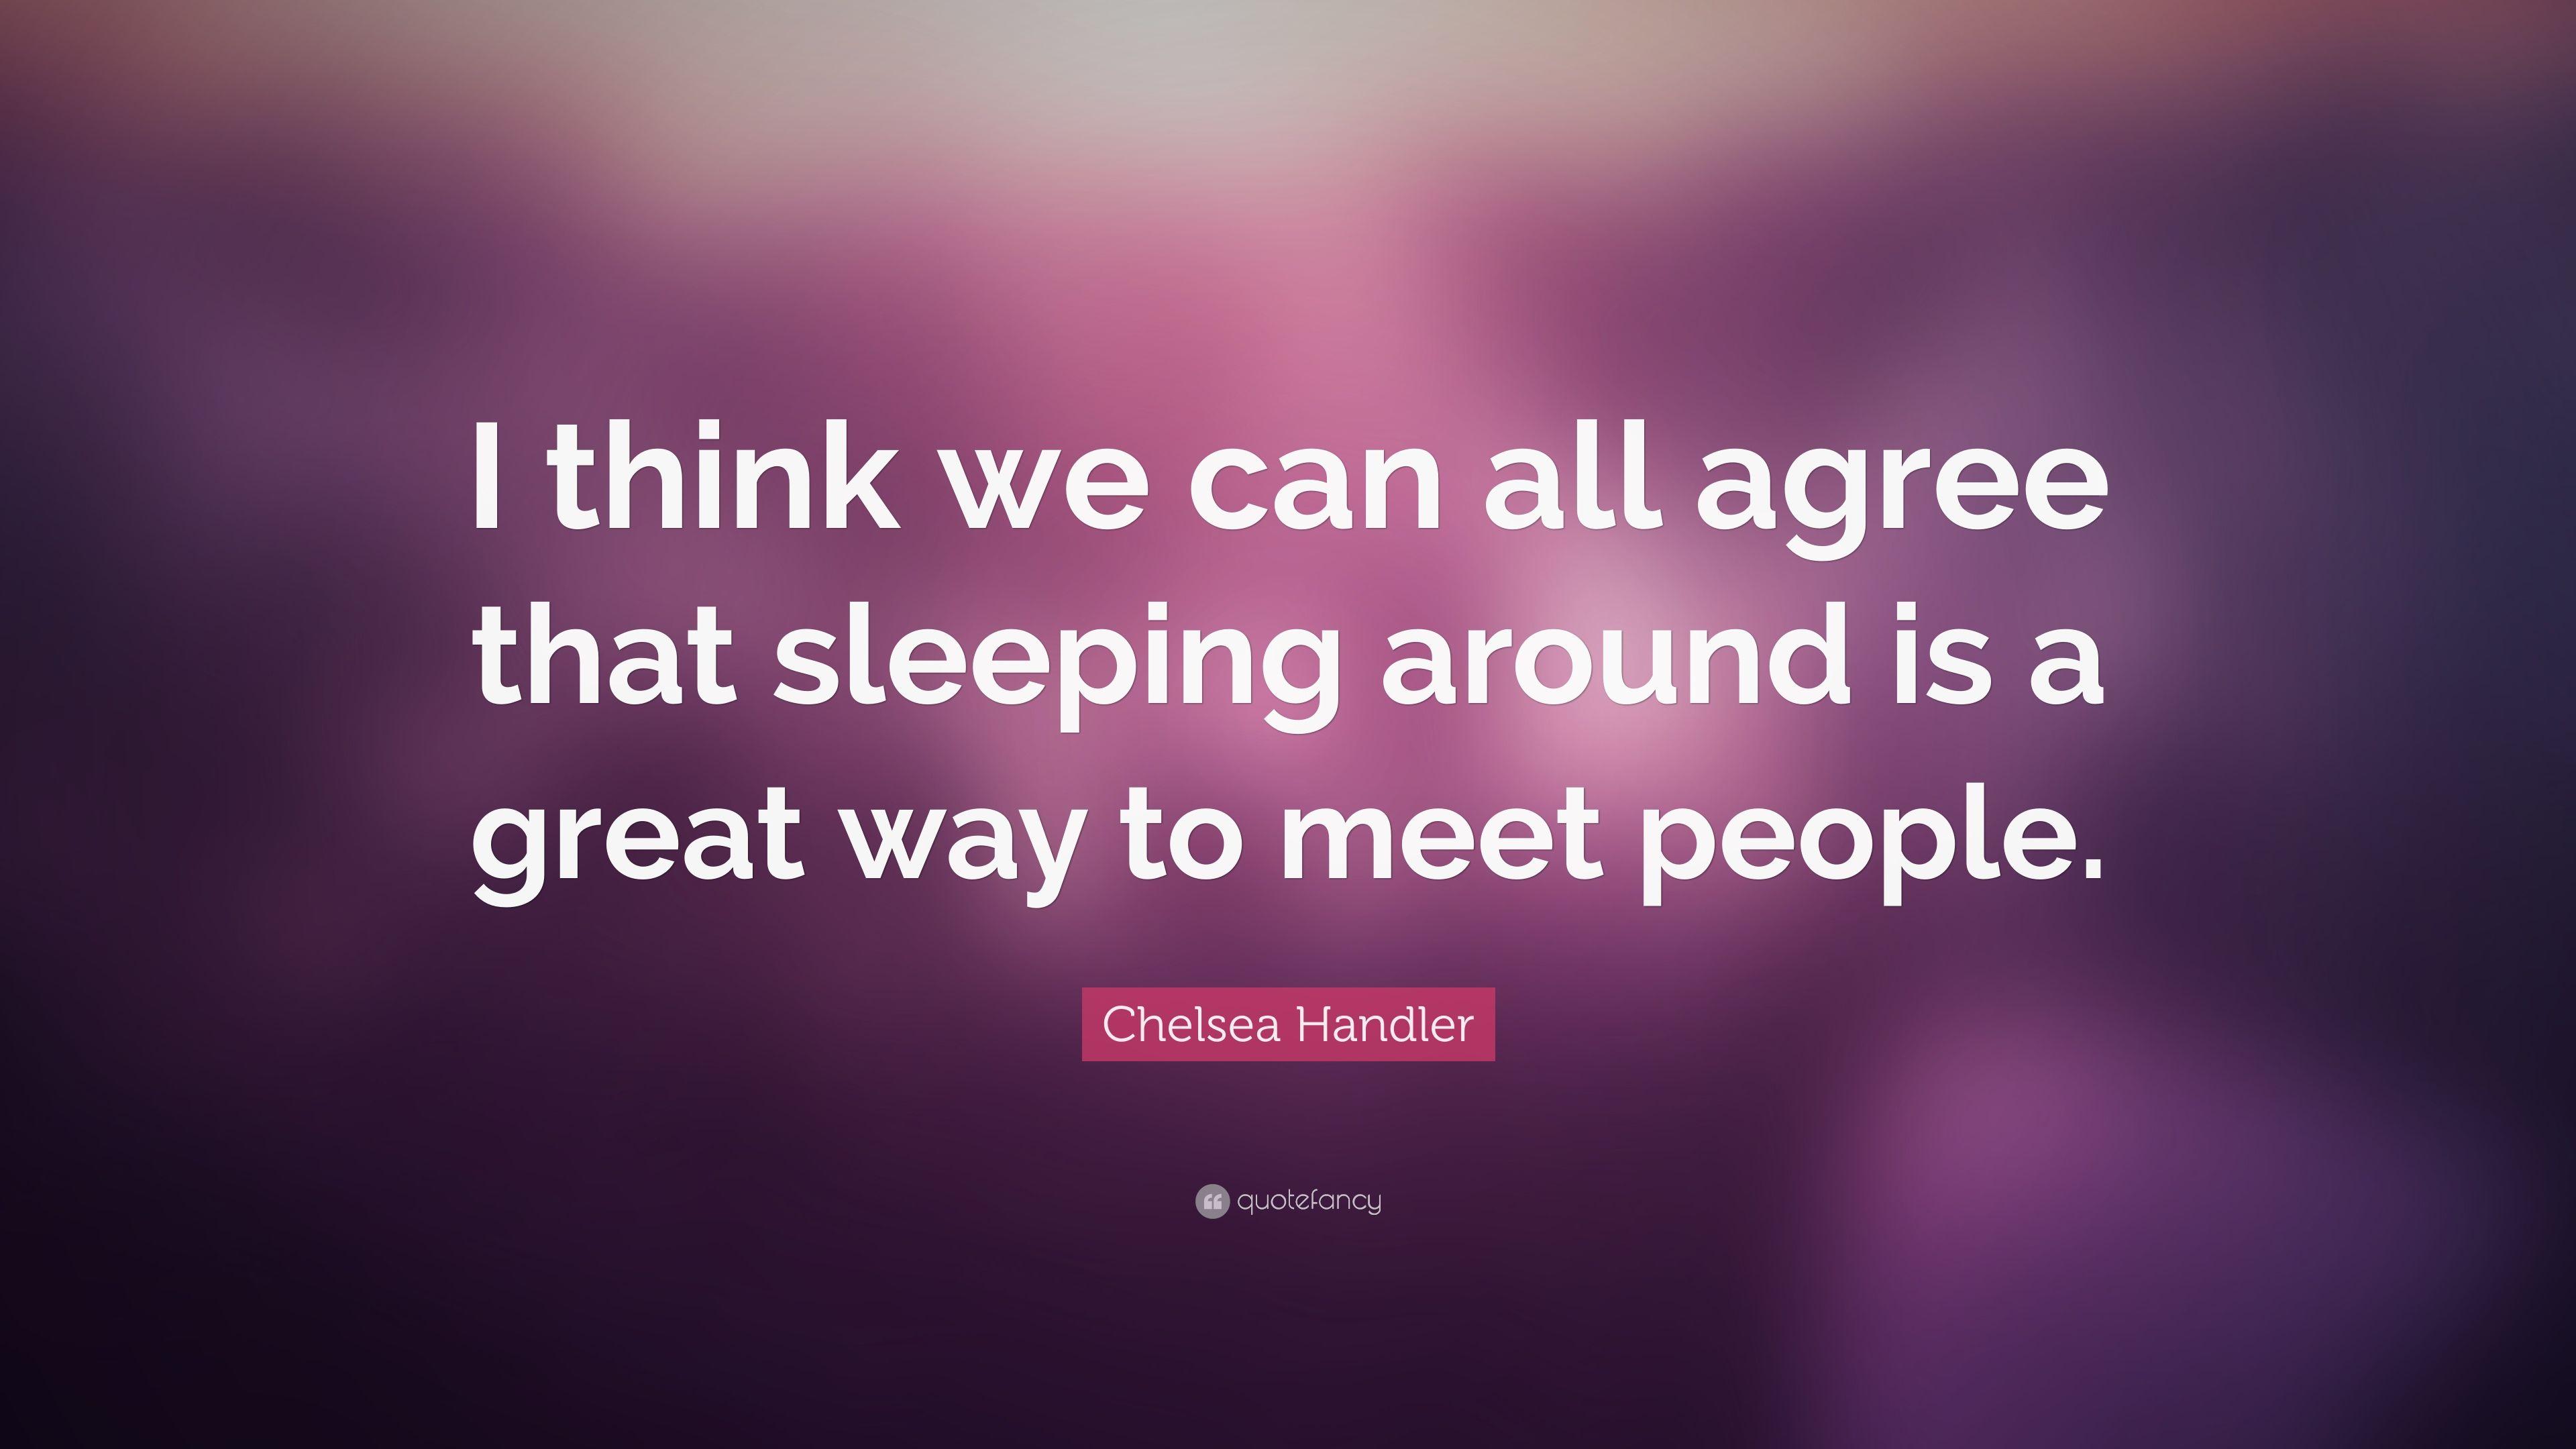 Chelsea Handler Quote: “I think we can all agree that sleeping